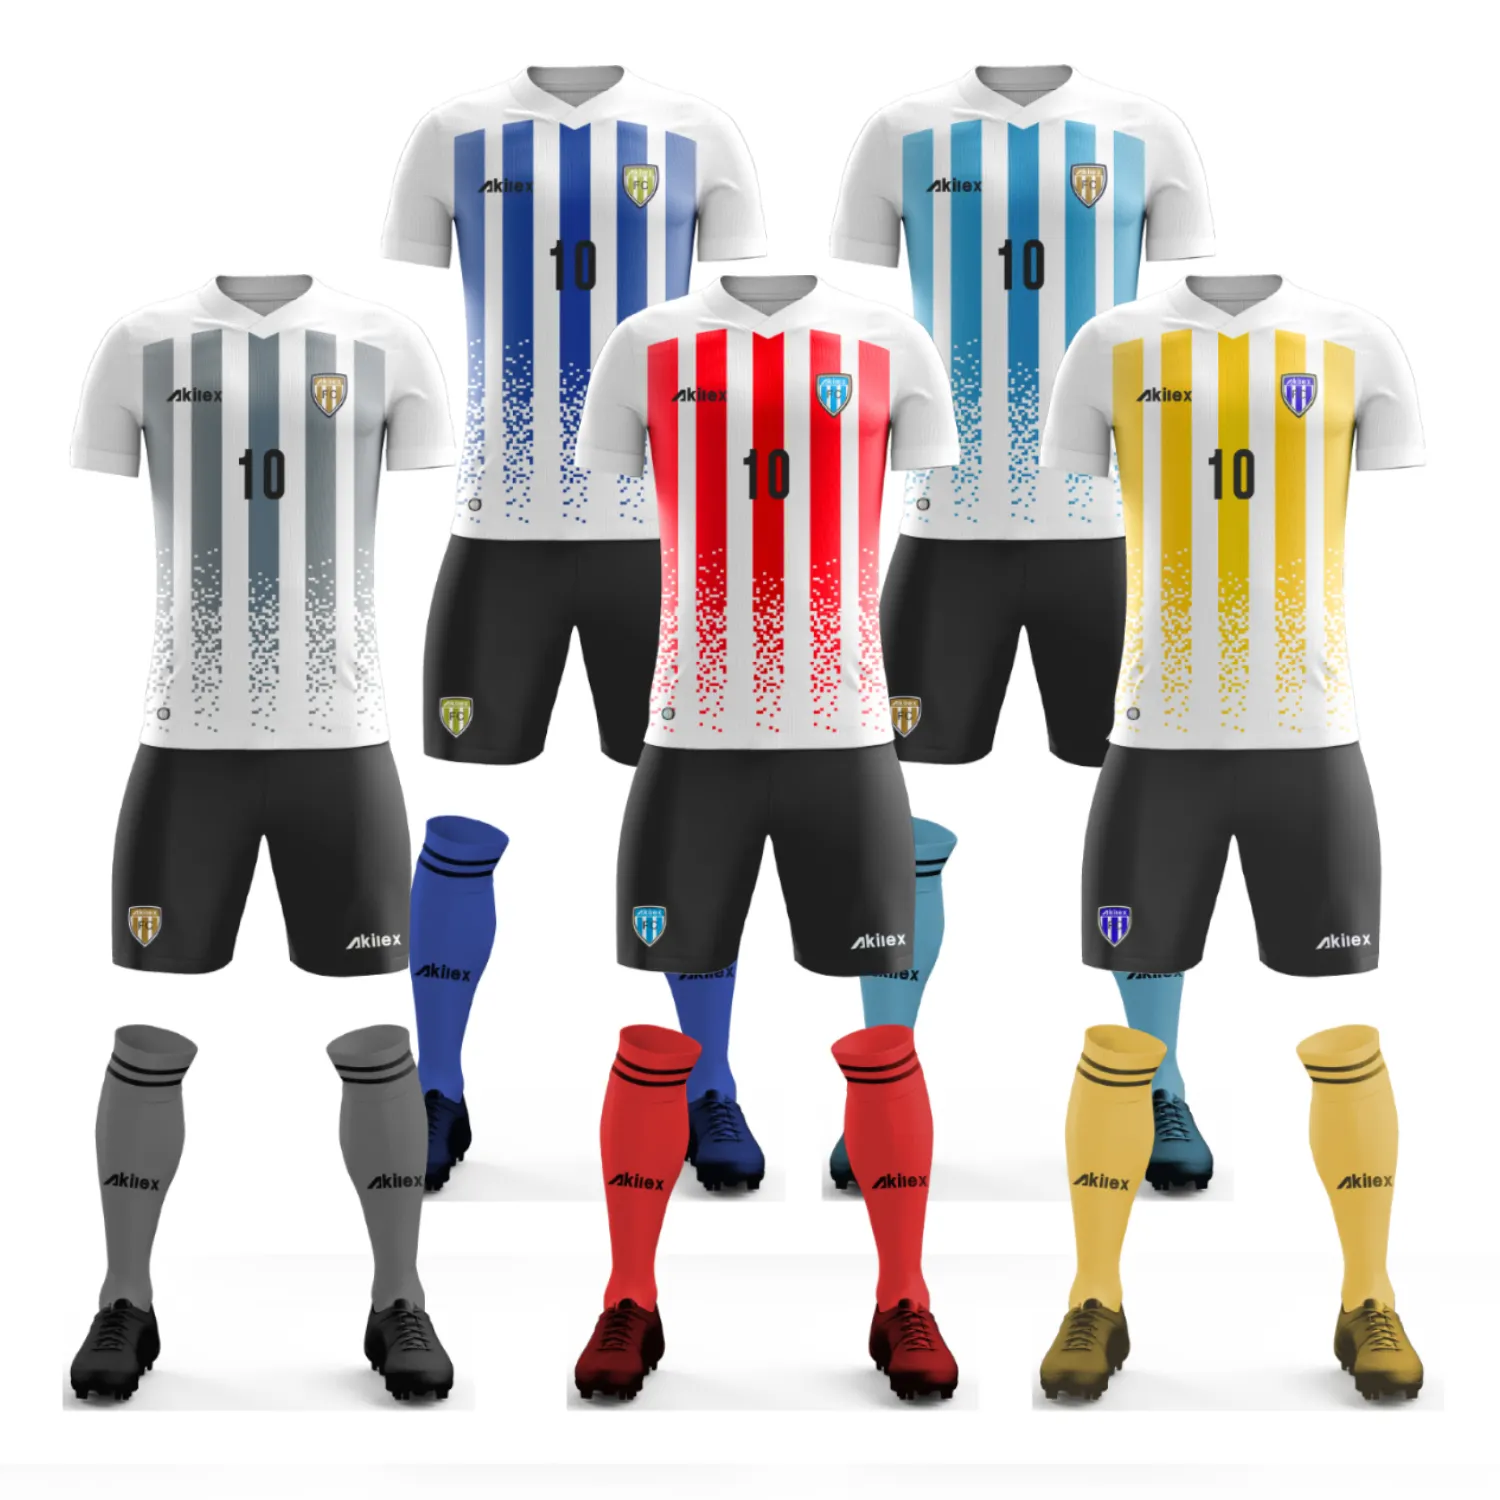 Free Model Design Football Team Soccer Jersey Set Sublimation Soccer Wear Printing Gift Sets Sportswear Customized Adults